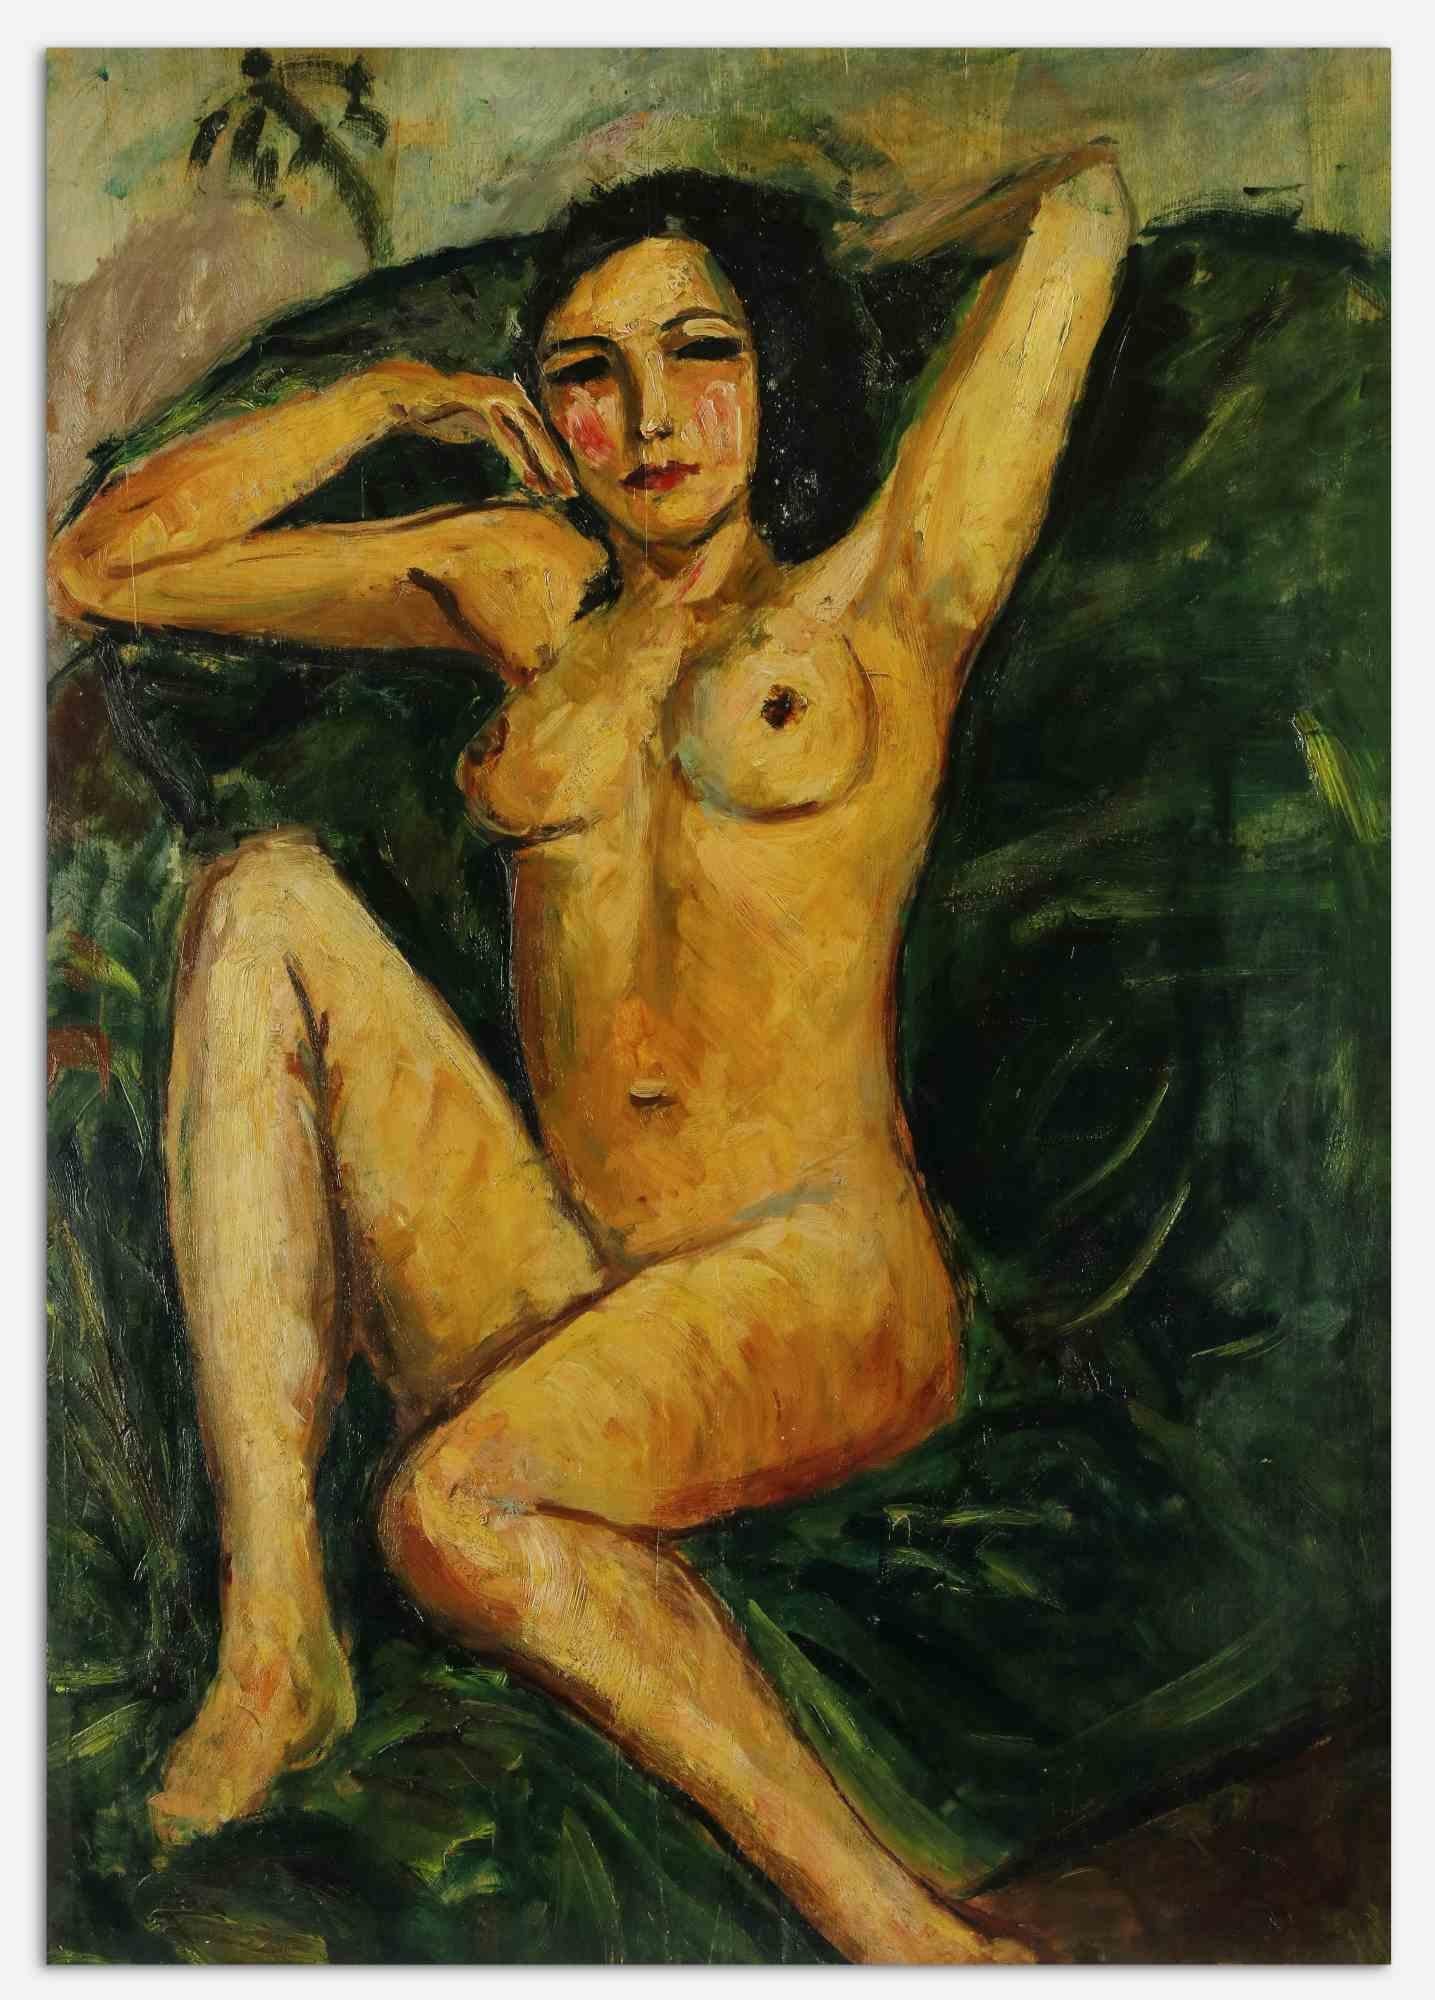 Nude is an orignal modern artwork realized by Antonio Feltrinelli in 1930s.

Mixed colored oil painting on board

Not signed.

